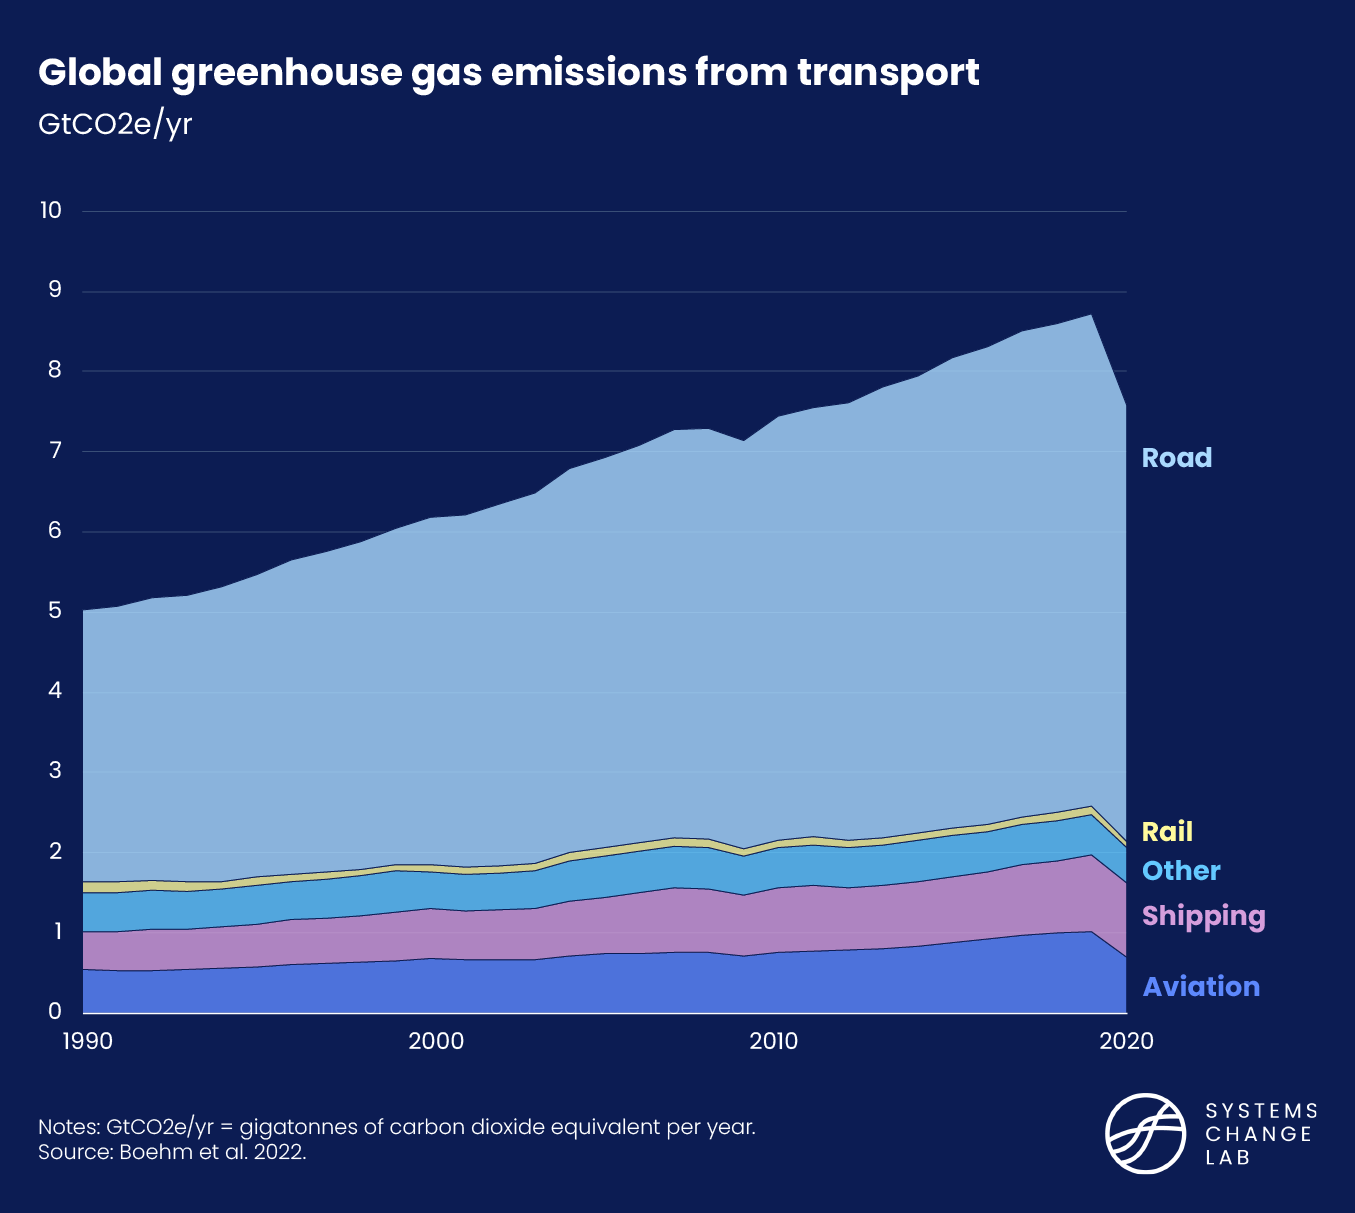 Global greenhouse gas emissions from transport, disaggregated